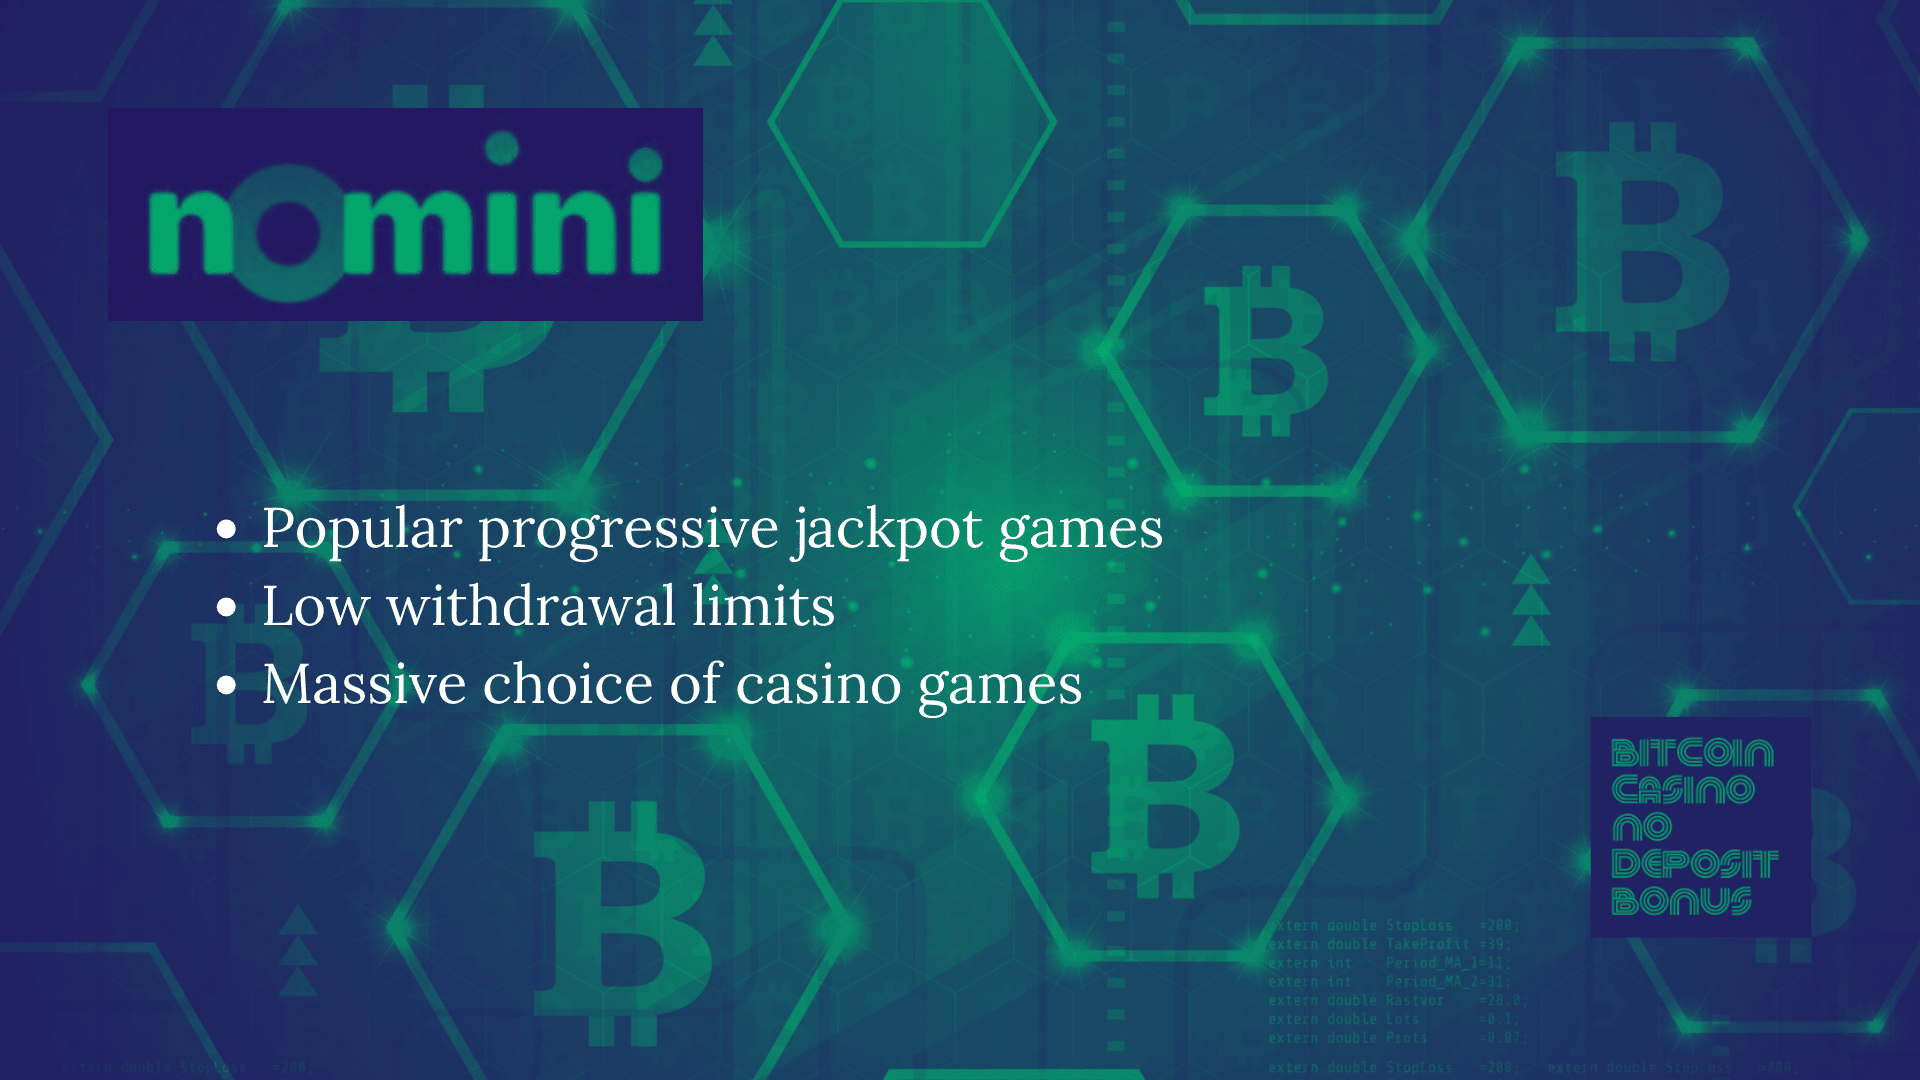 You are currently viewing Nomini Casino Promo Codes – Nomini.com Free Bonuses August 2022